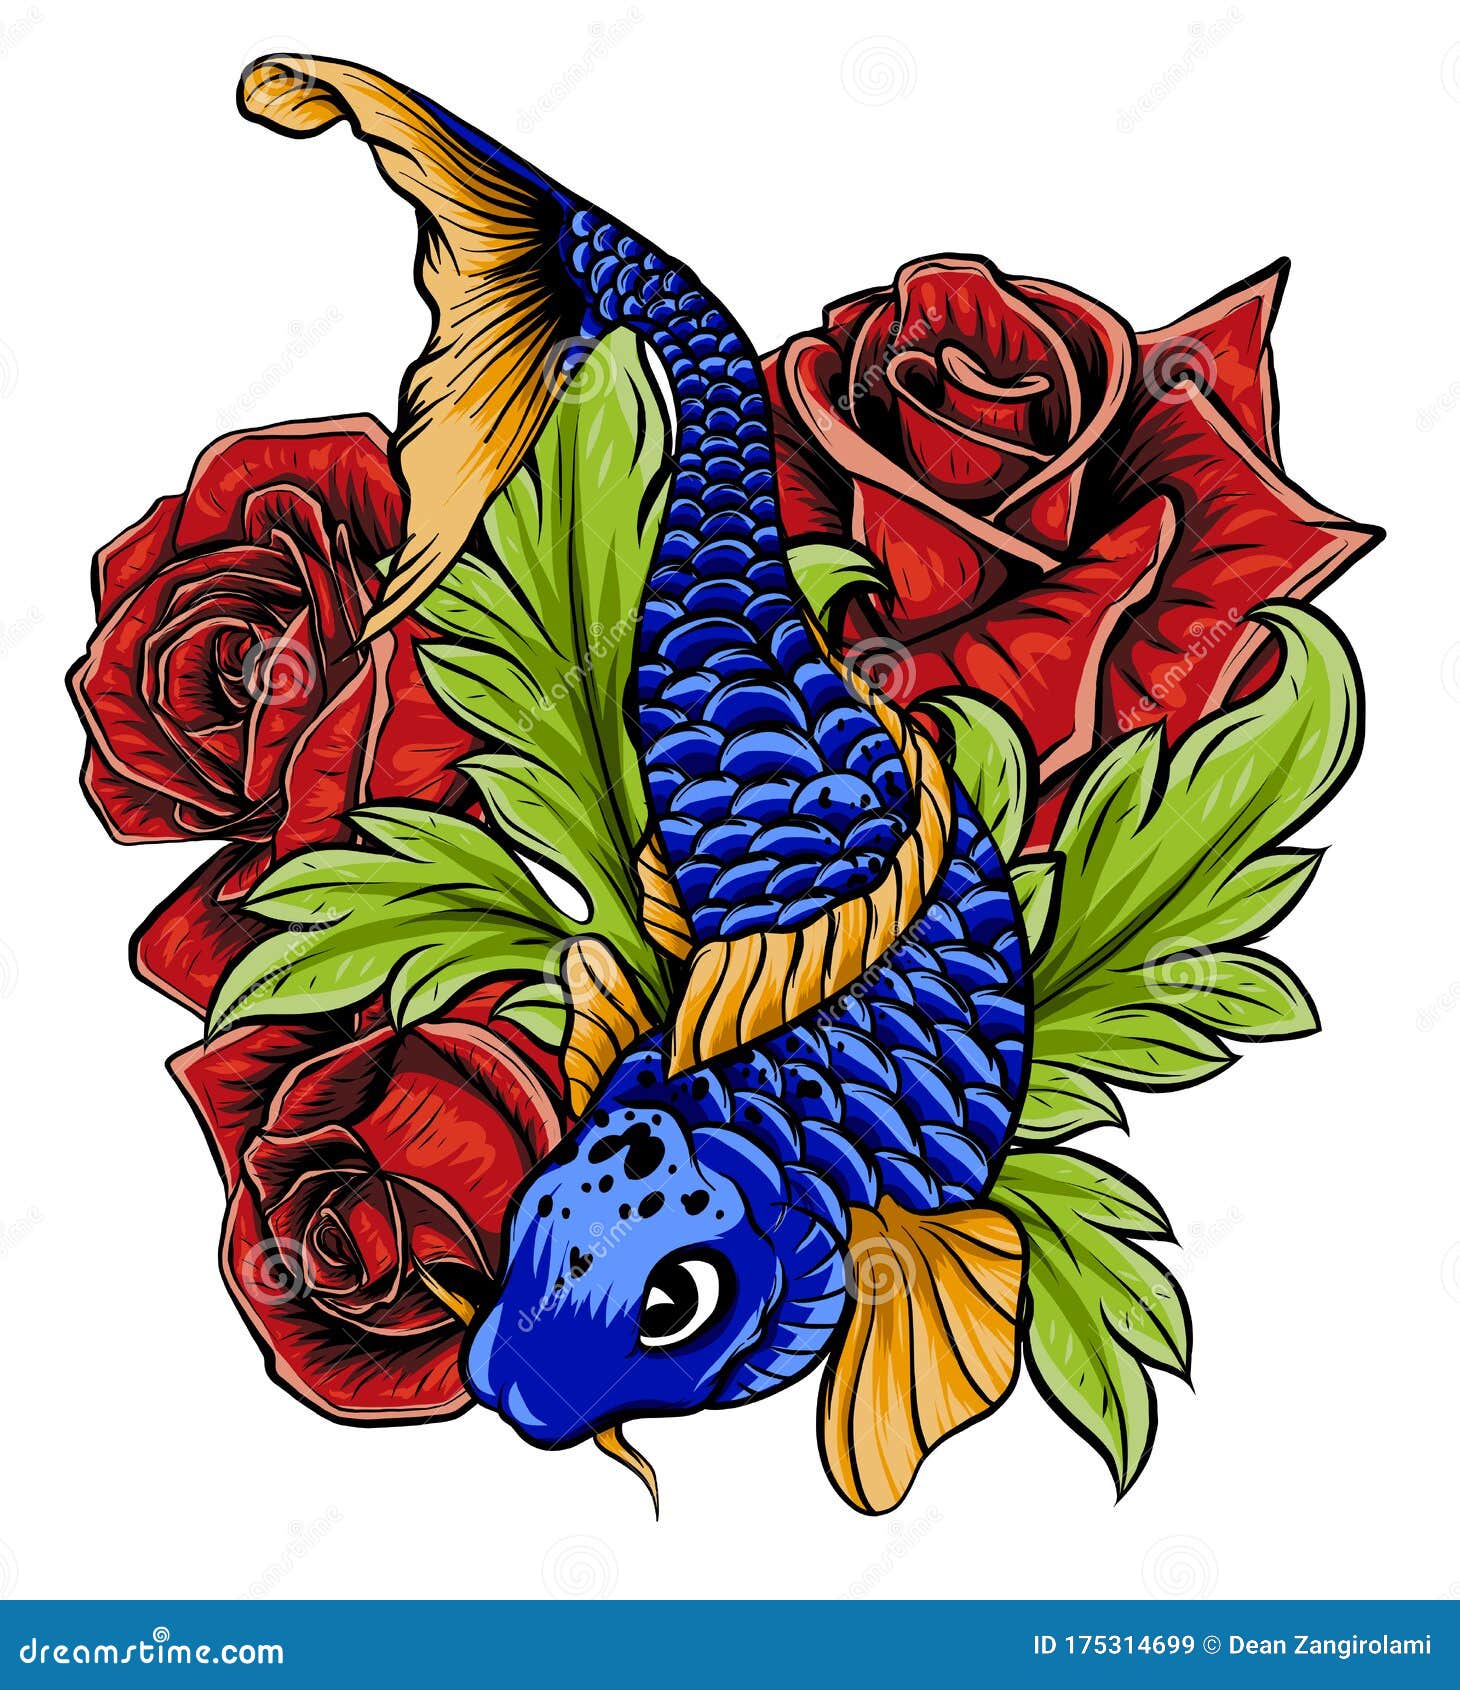 Hand Drawn Koi Fish with Flower Tattoo for  Koi Carp with Water  Splash Stock Vector - Illustration of black, isolated: 175314699